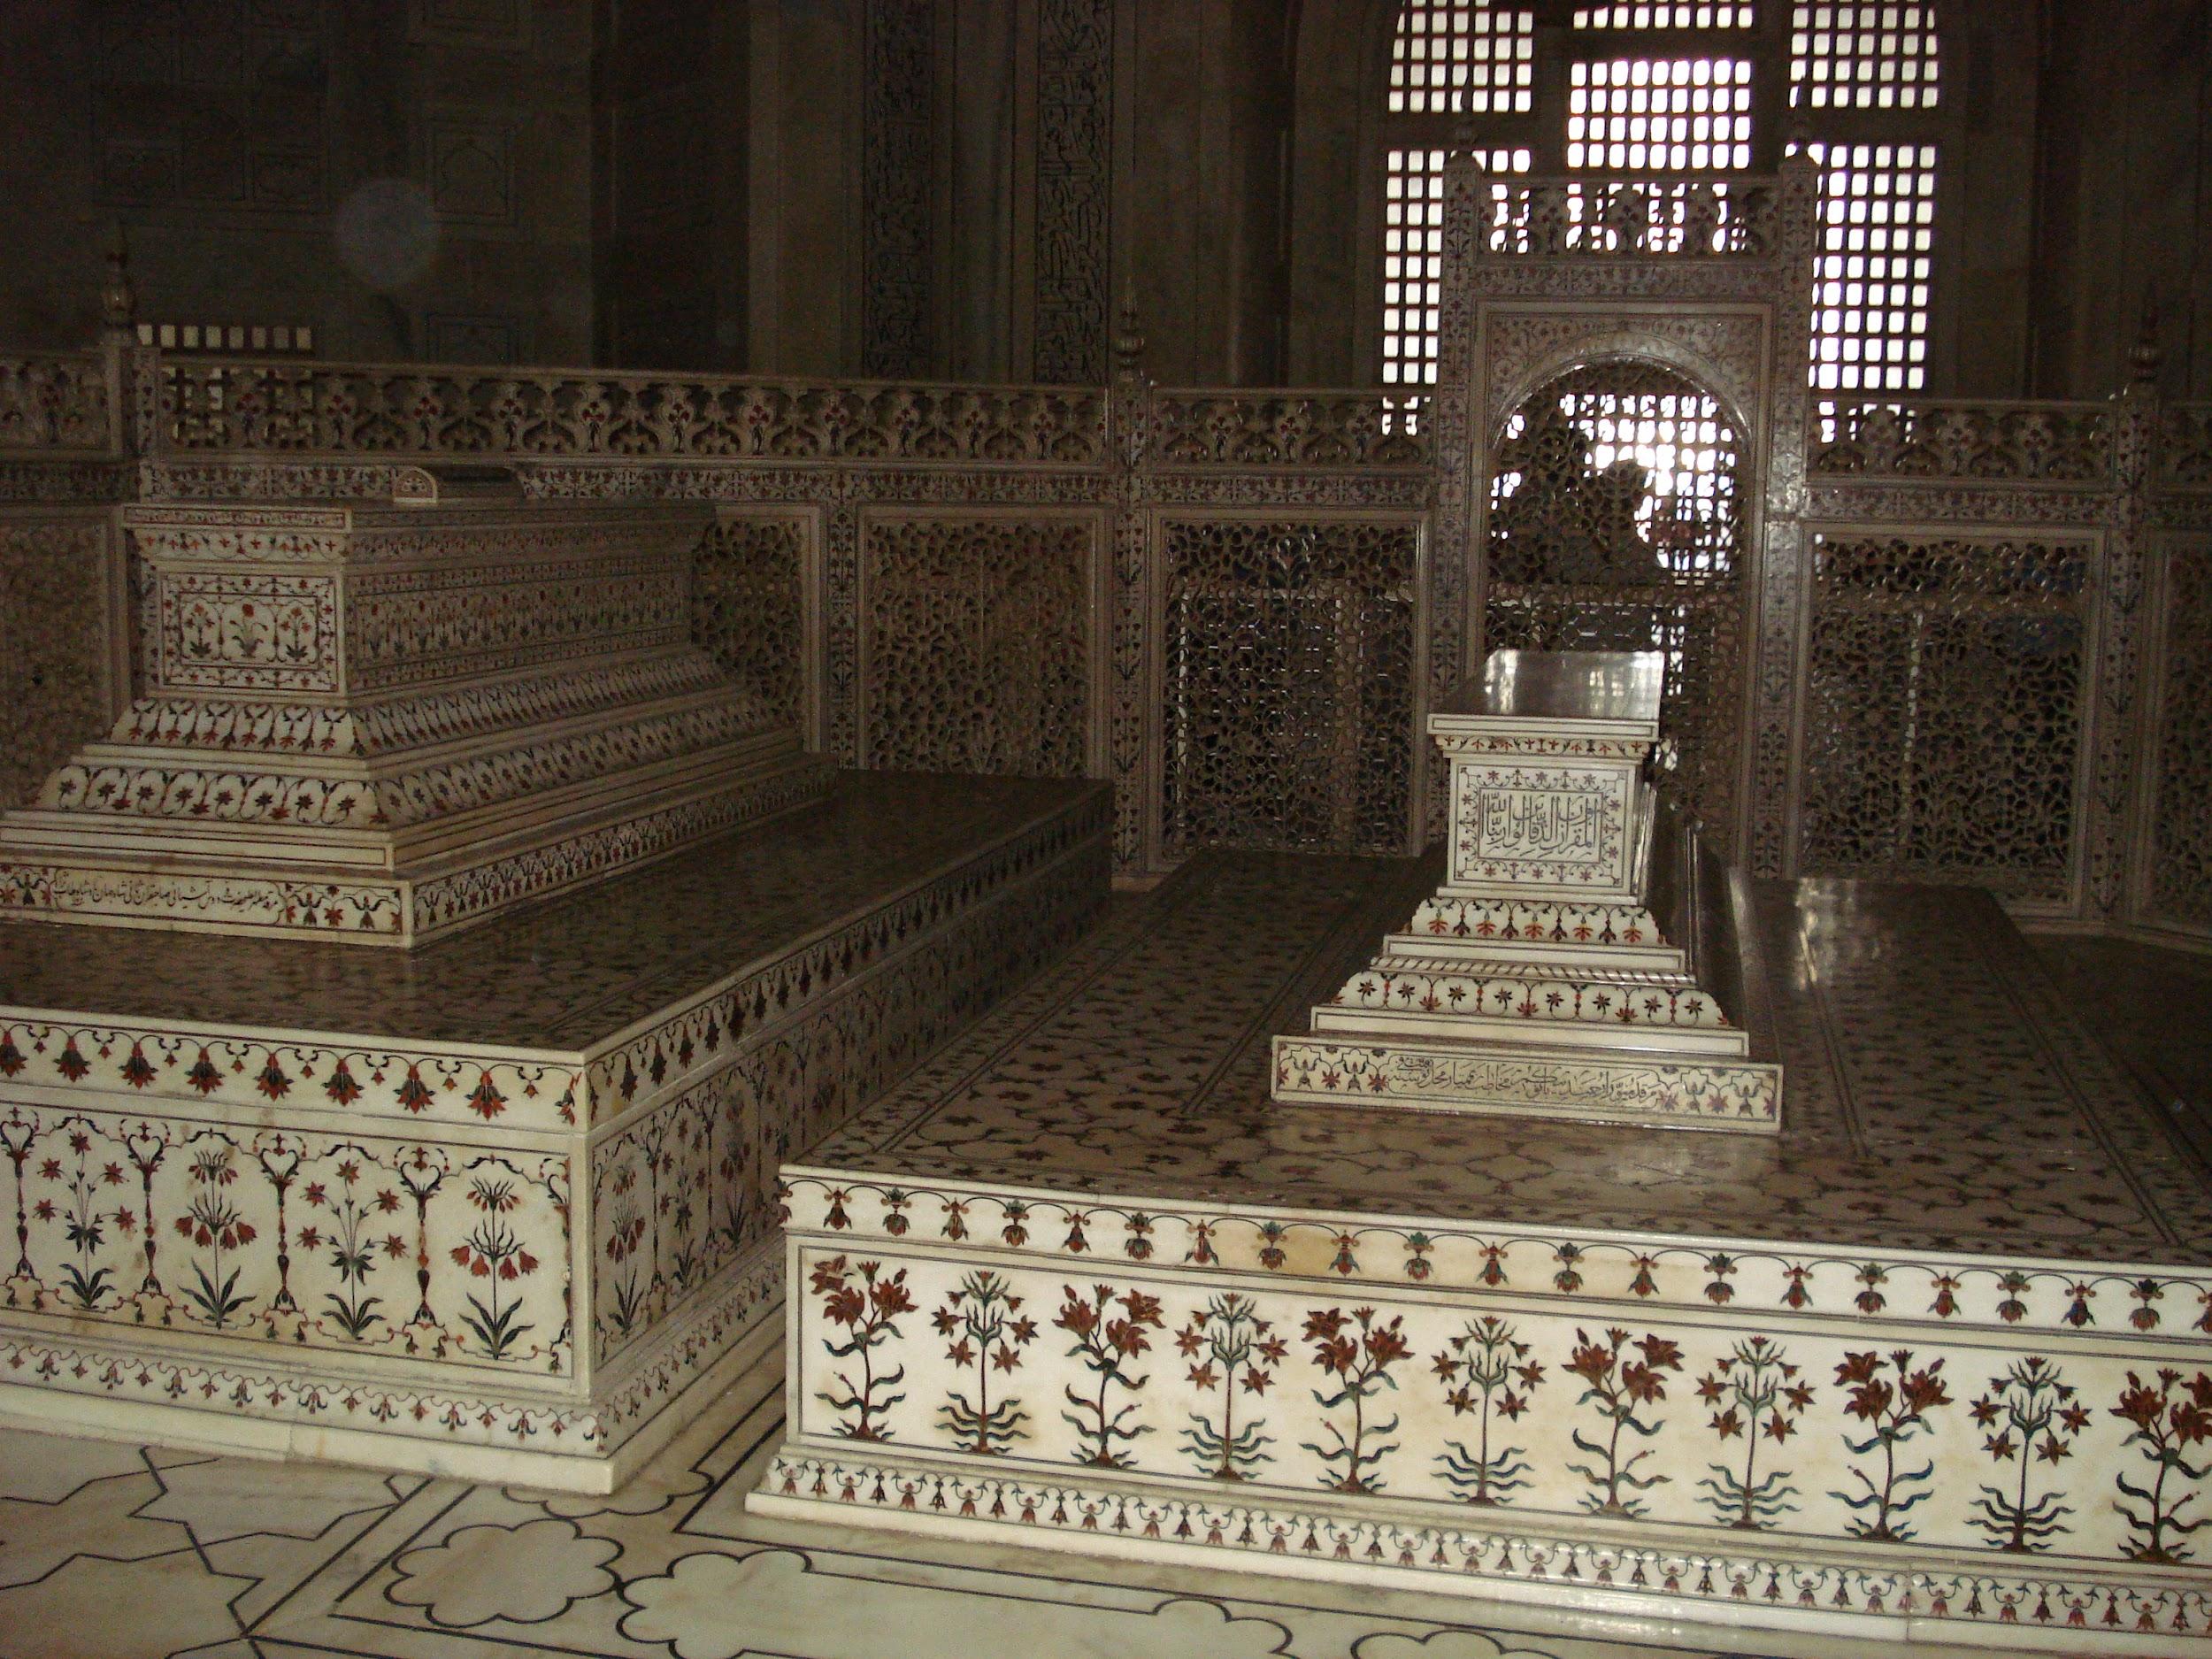 An image of the main chamber and the false tombs open to the public.